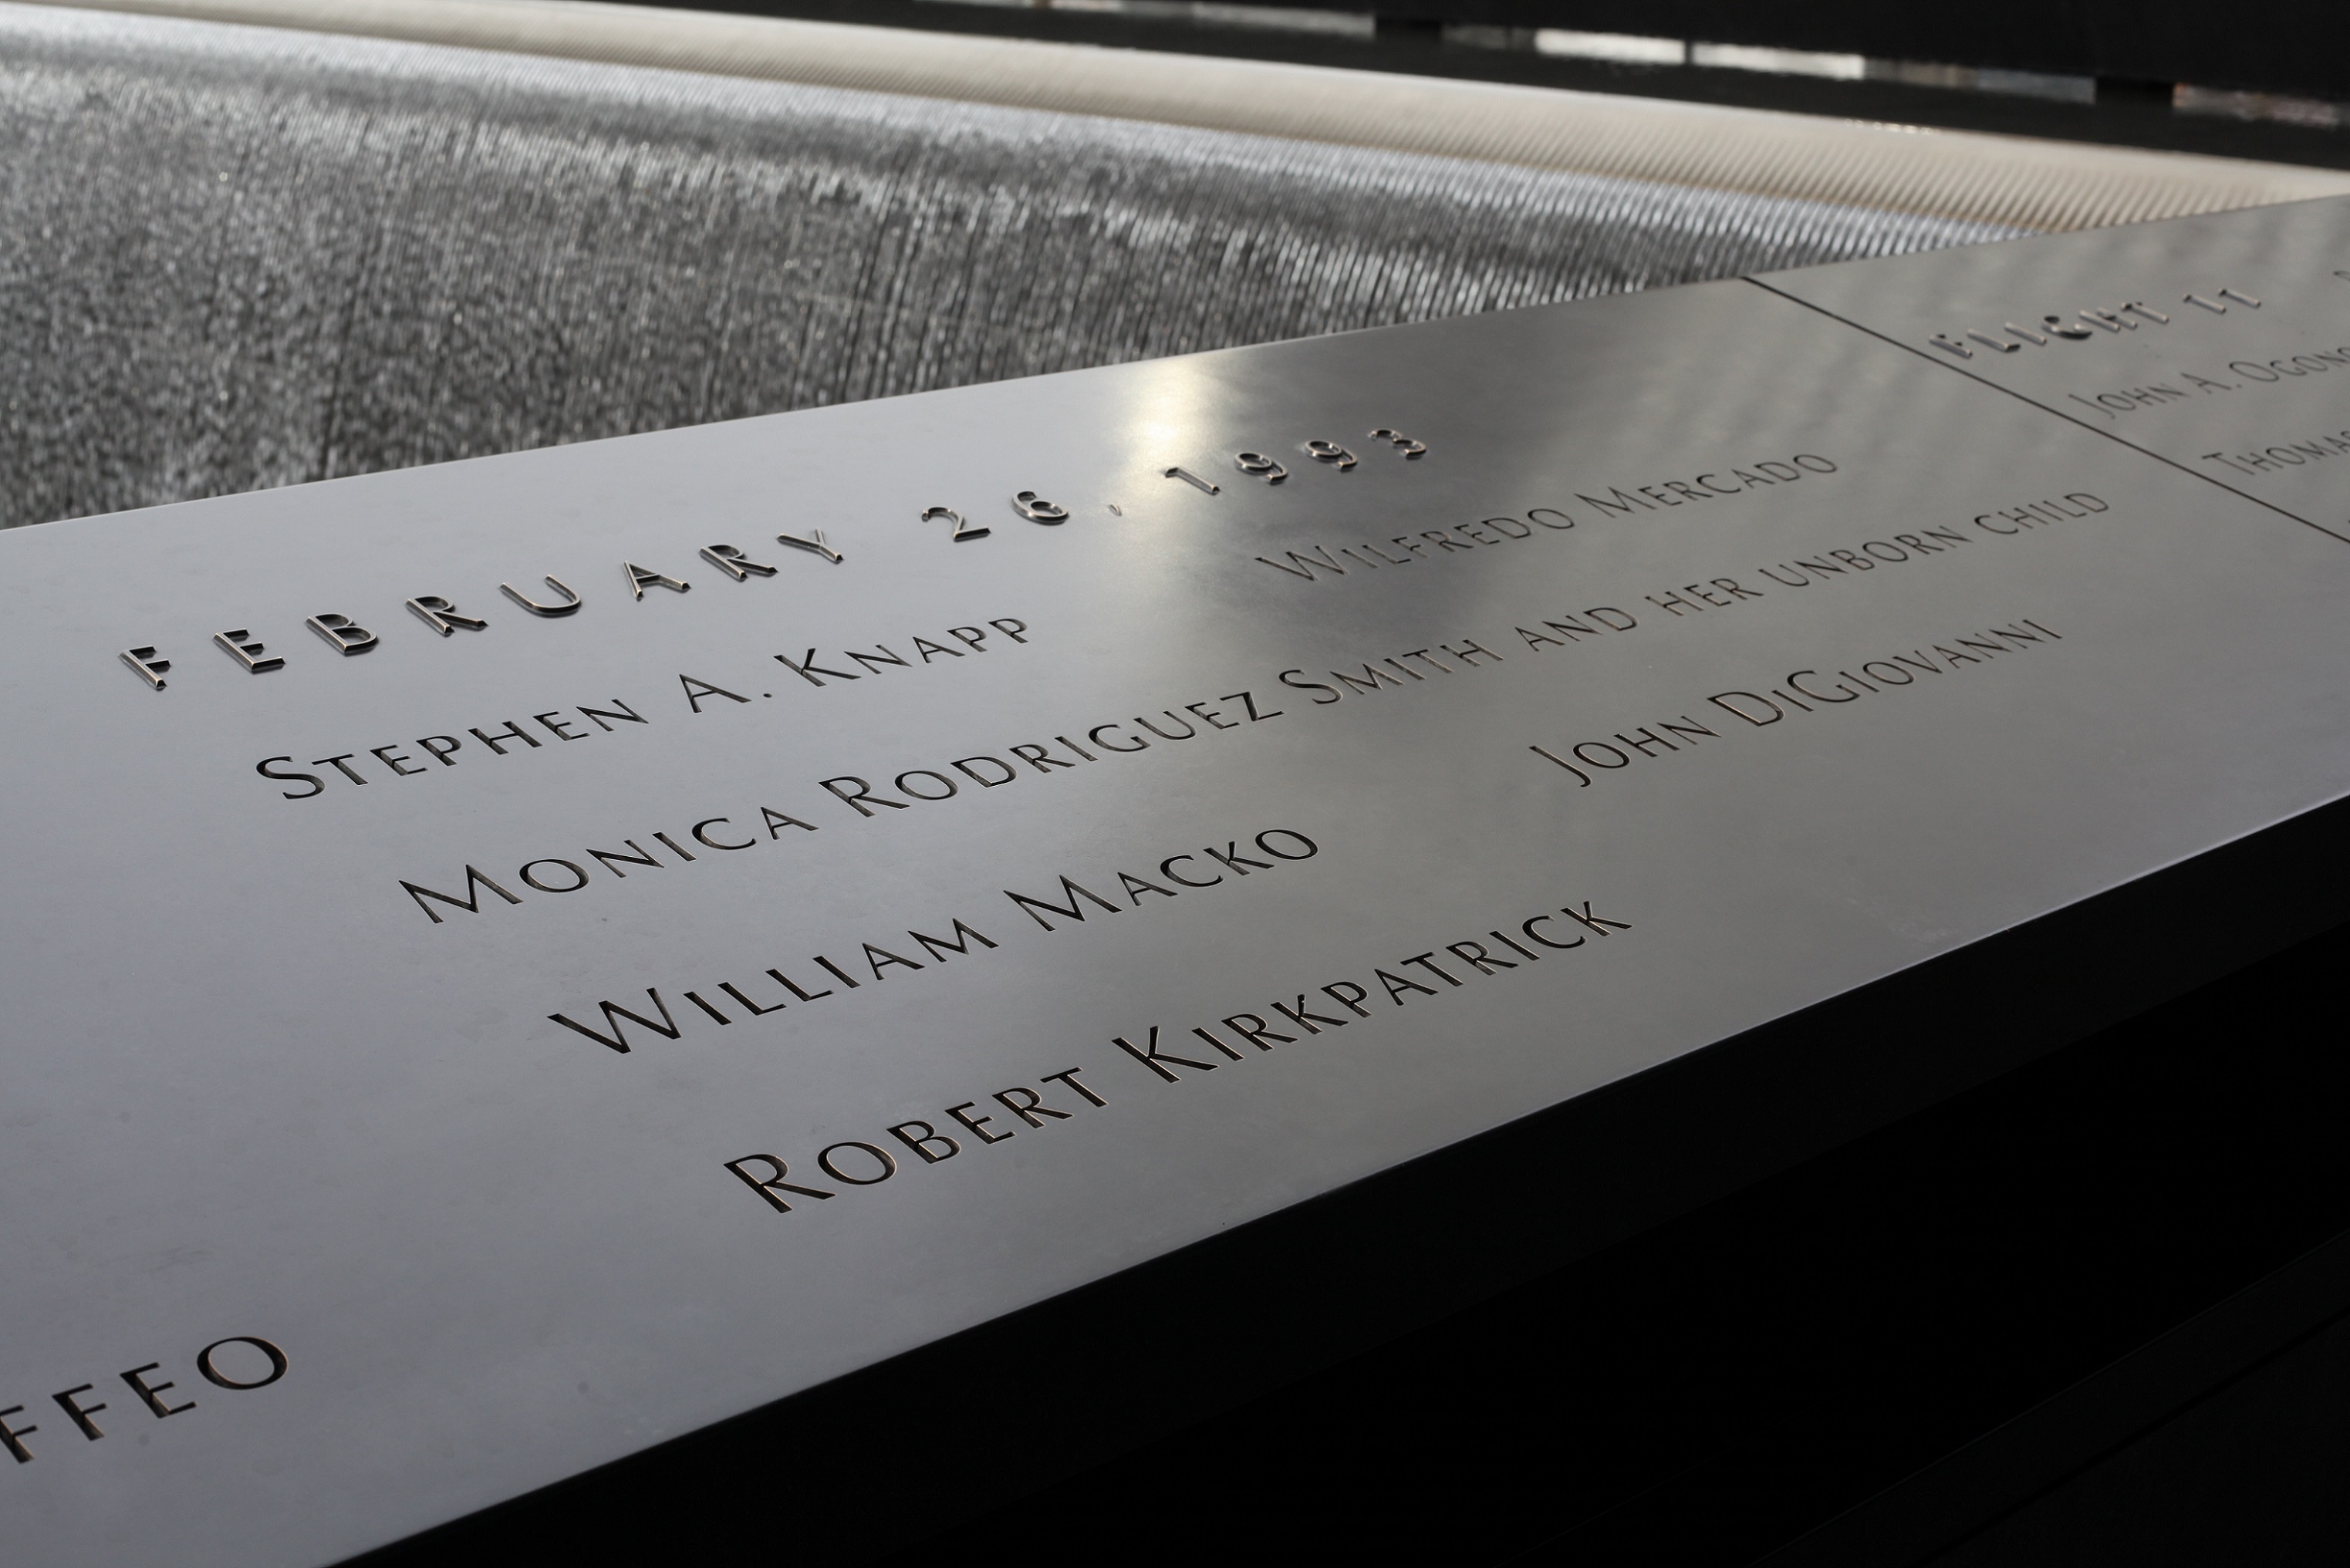 Names of February 23, 1993 bombing victims on the Memorial